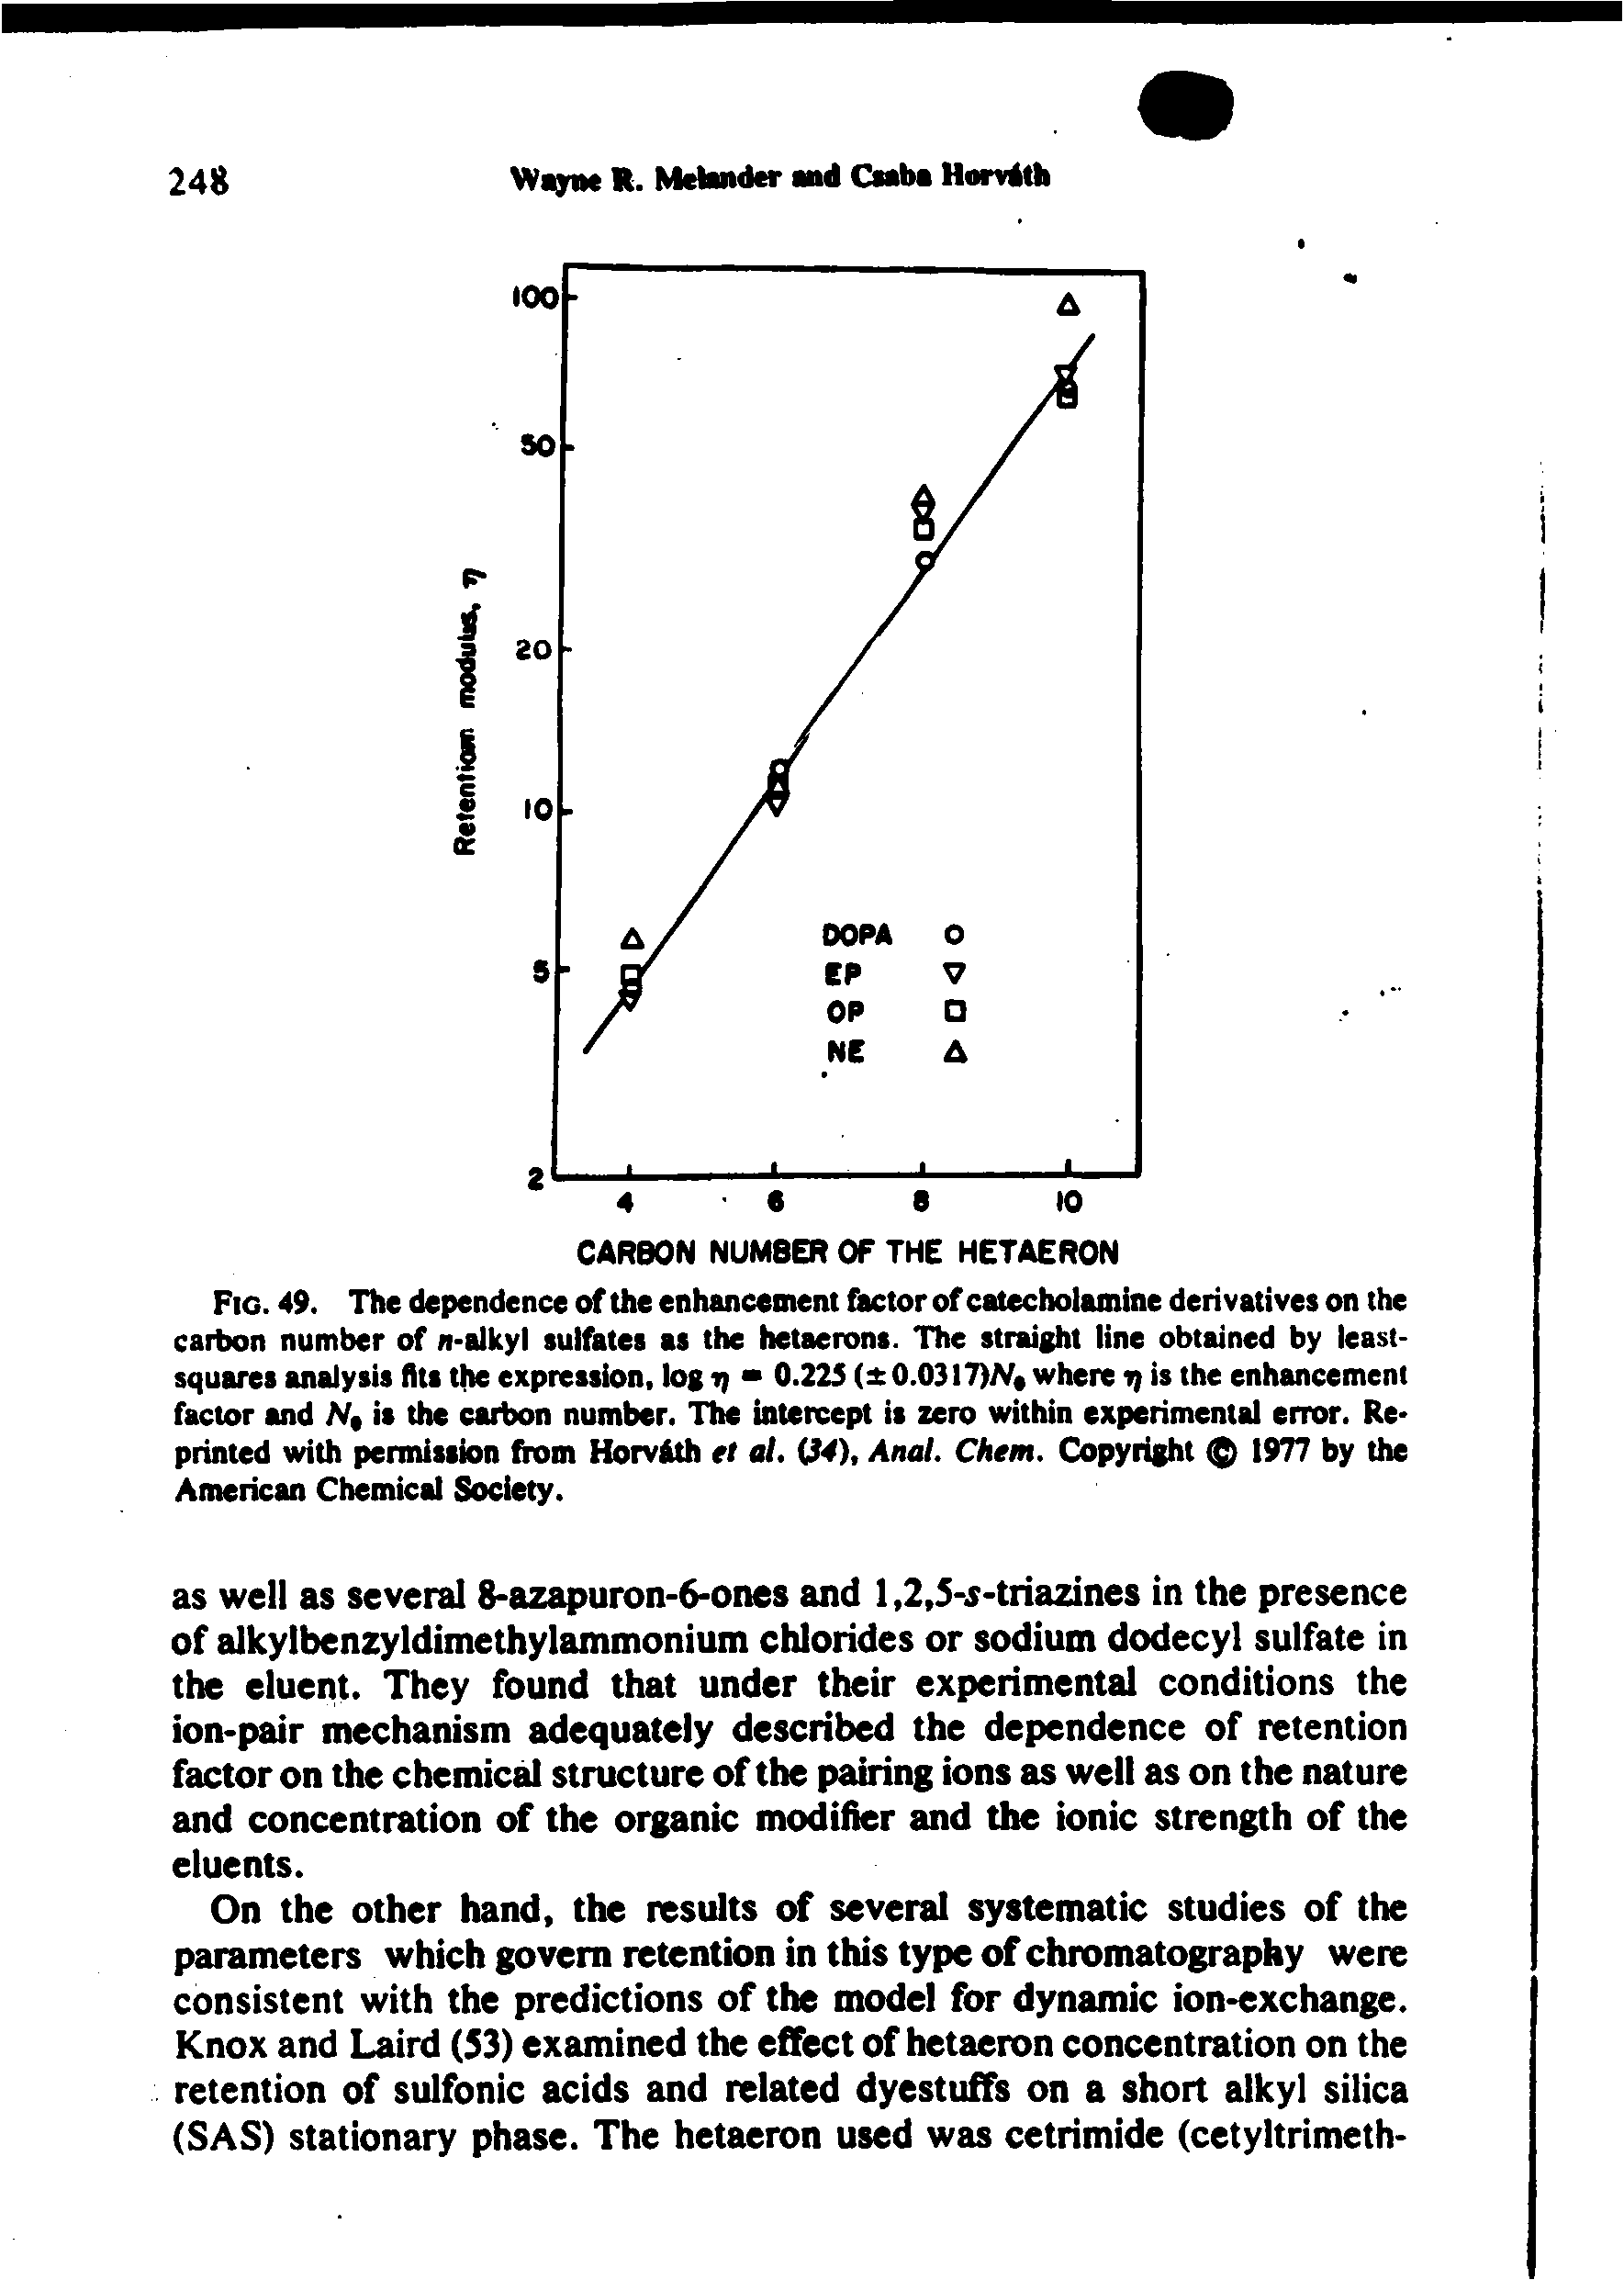 Fig. 49. The dependence of the enhancement factor of catecholamine derivatives on the carbon number of n-alkyl sulfates as the hetaerons. The straight line obtained by least-squares analysis fits the expression, logi 0.22S ( 0.0317)Af where is the enhancement factor and N is the carbon number. The intercept is zero within experimental error. Reprinted with permission from HorvAth et al, (S4), Anal. Chem. Copyright 1977 by the American Chemical Society.